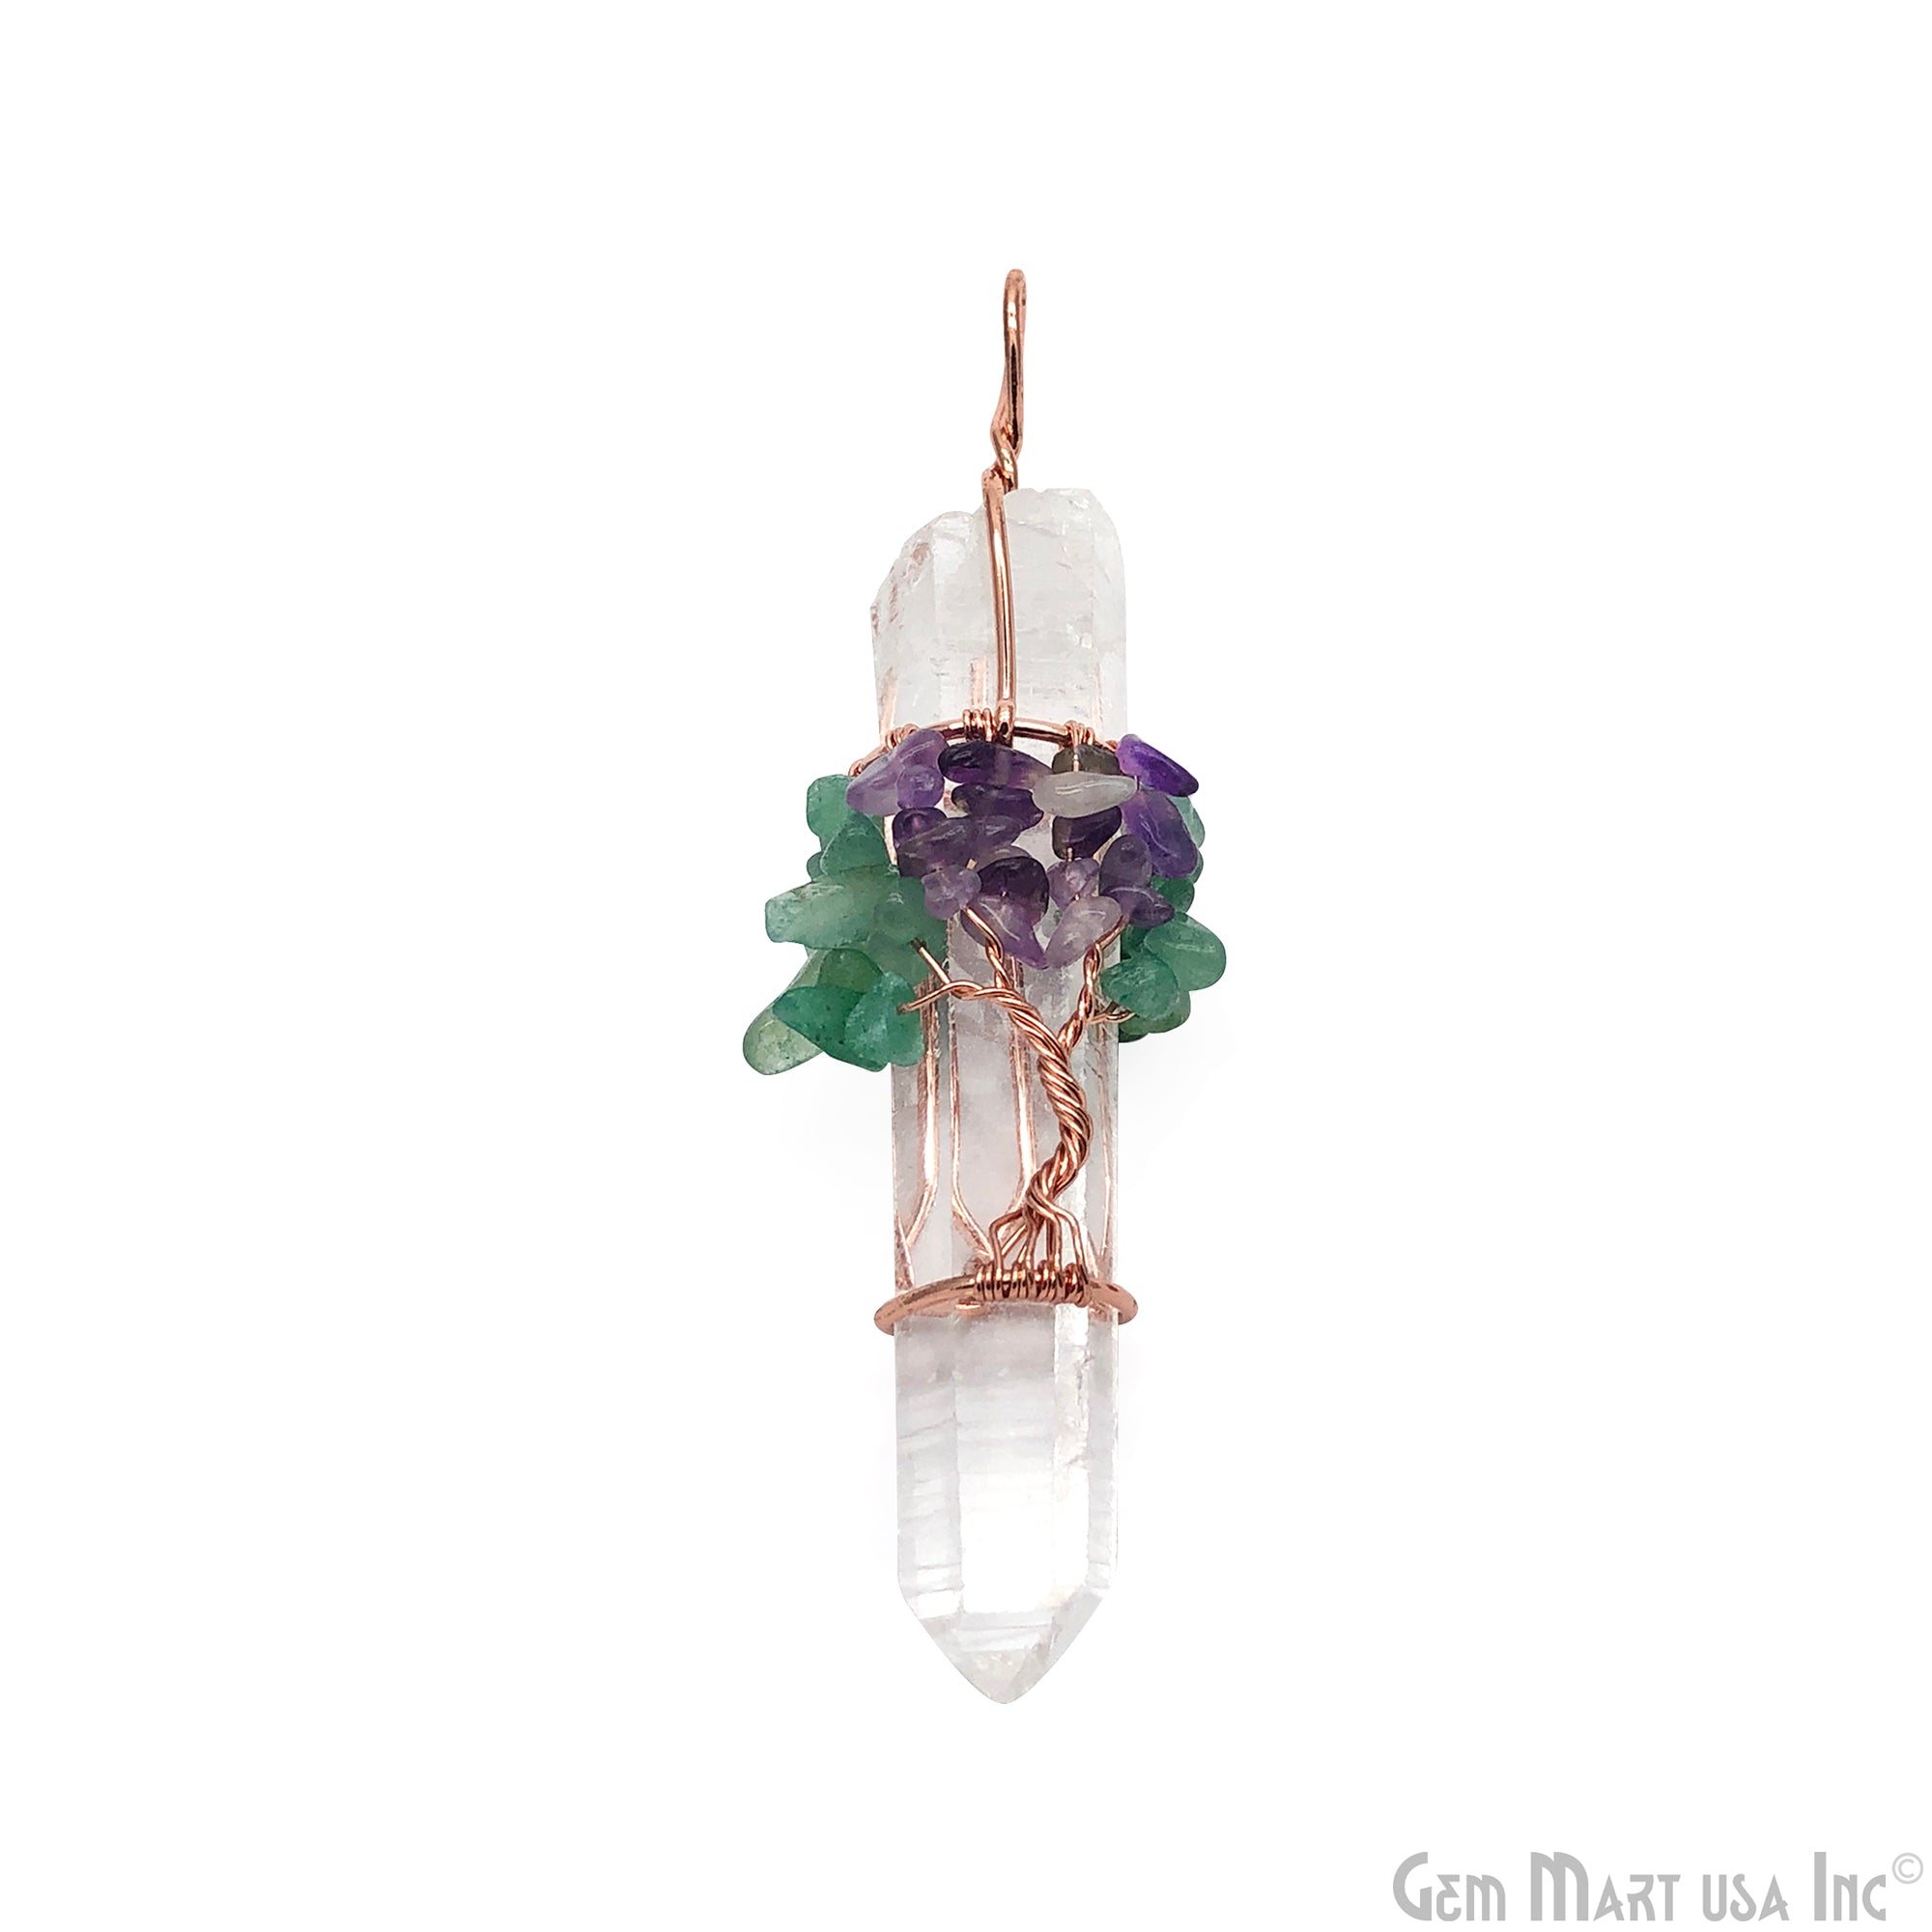 Crystal Pencil Point Pendant, Rough Gemstone, Rose Gold Plated, Tree of Life Wire Wrapped Necklace Pendant, 2.5-3Inch